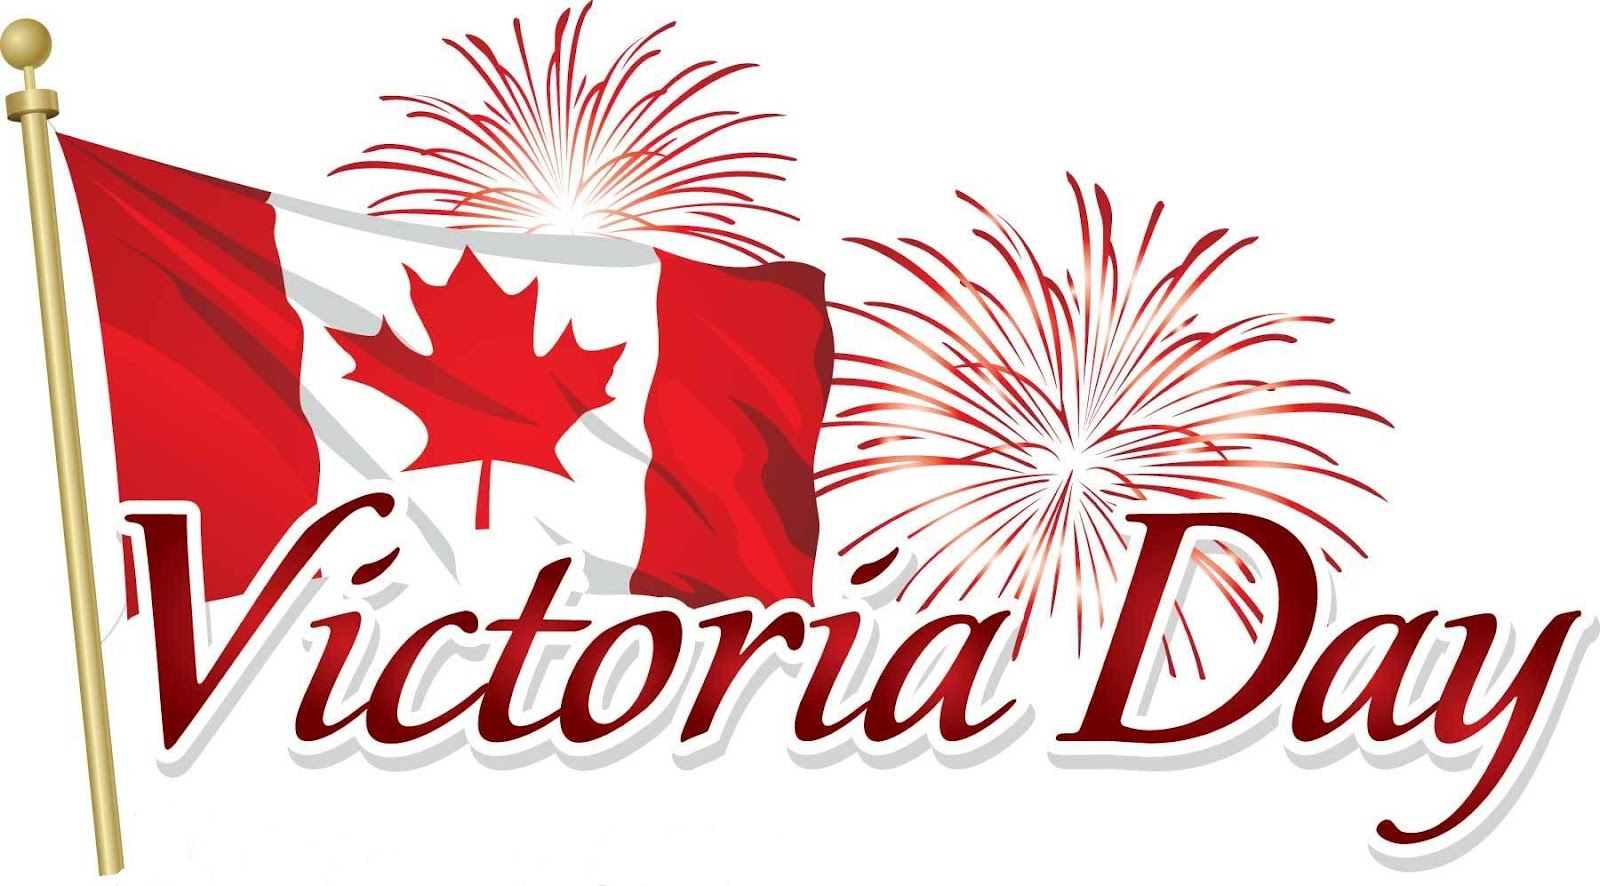 Victoria Day activities and schedule changes Jean Cloutier